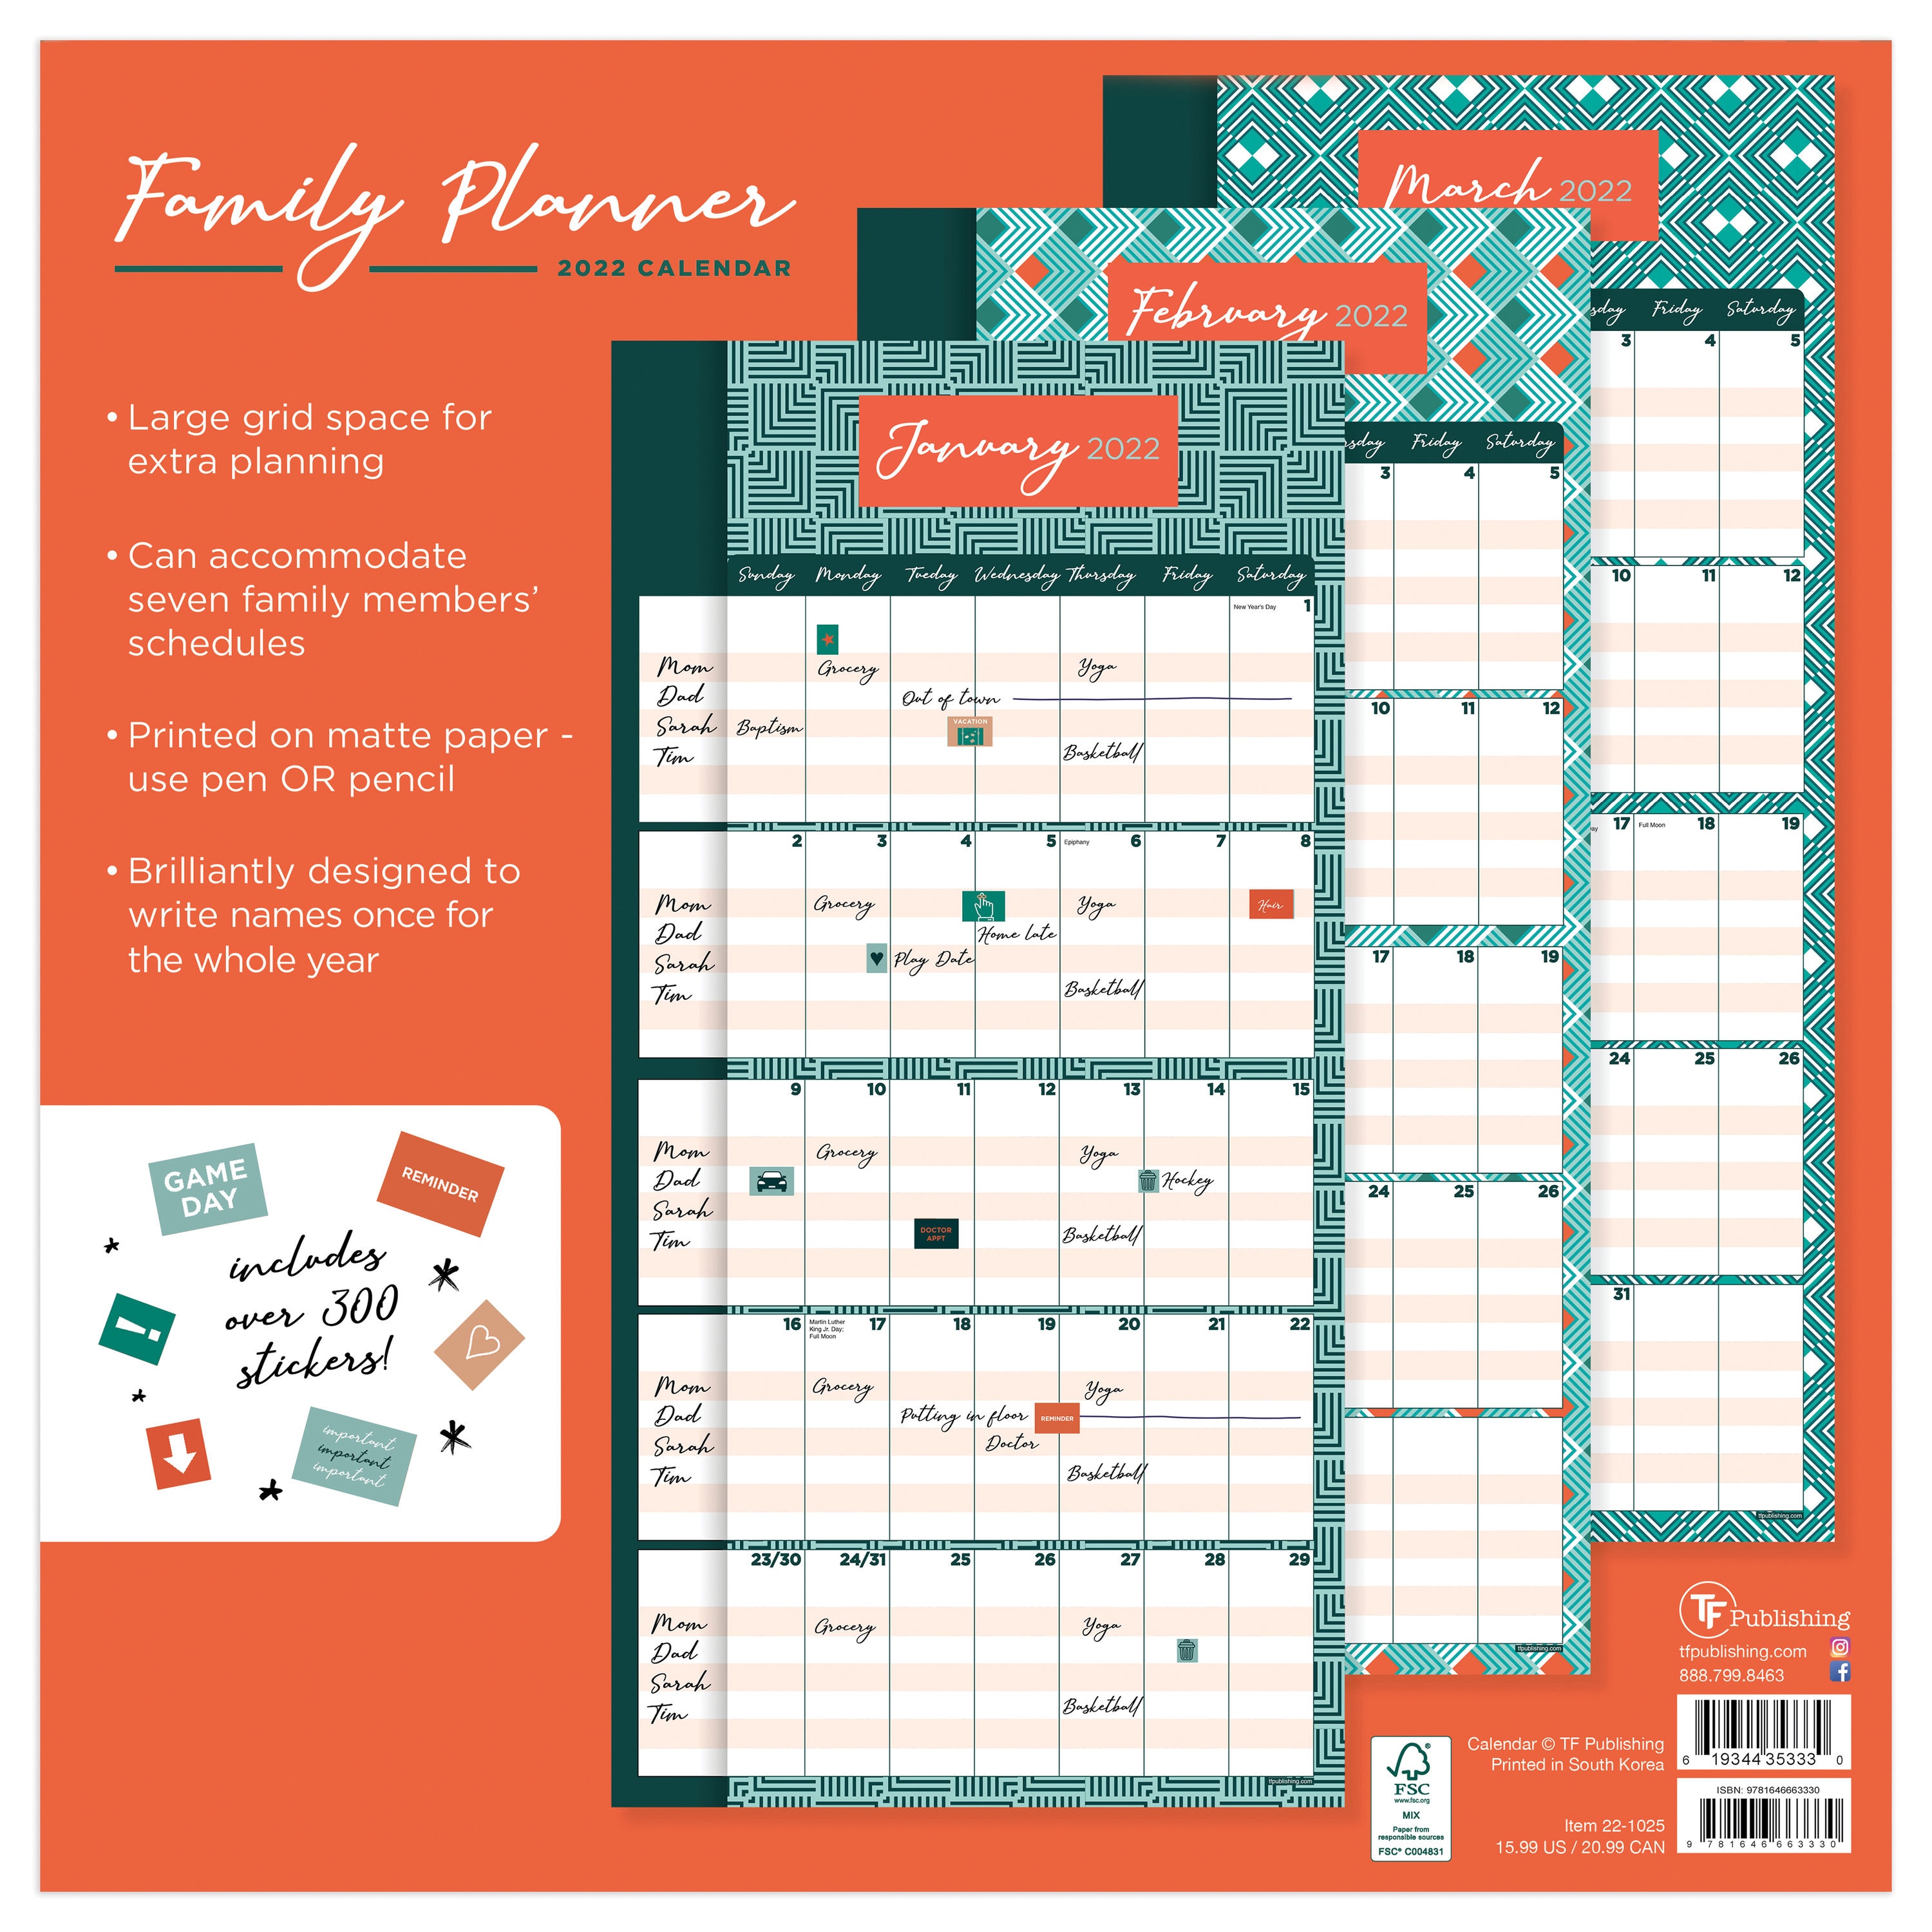 TF Publishing 2022 Family Planner Wall Calendar in the Calendars